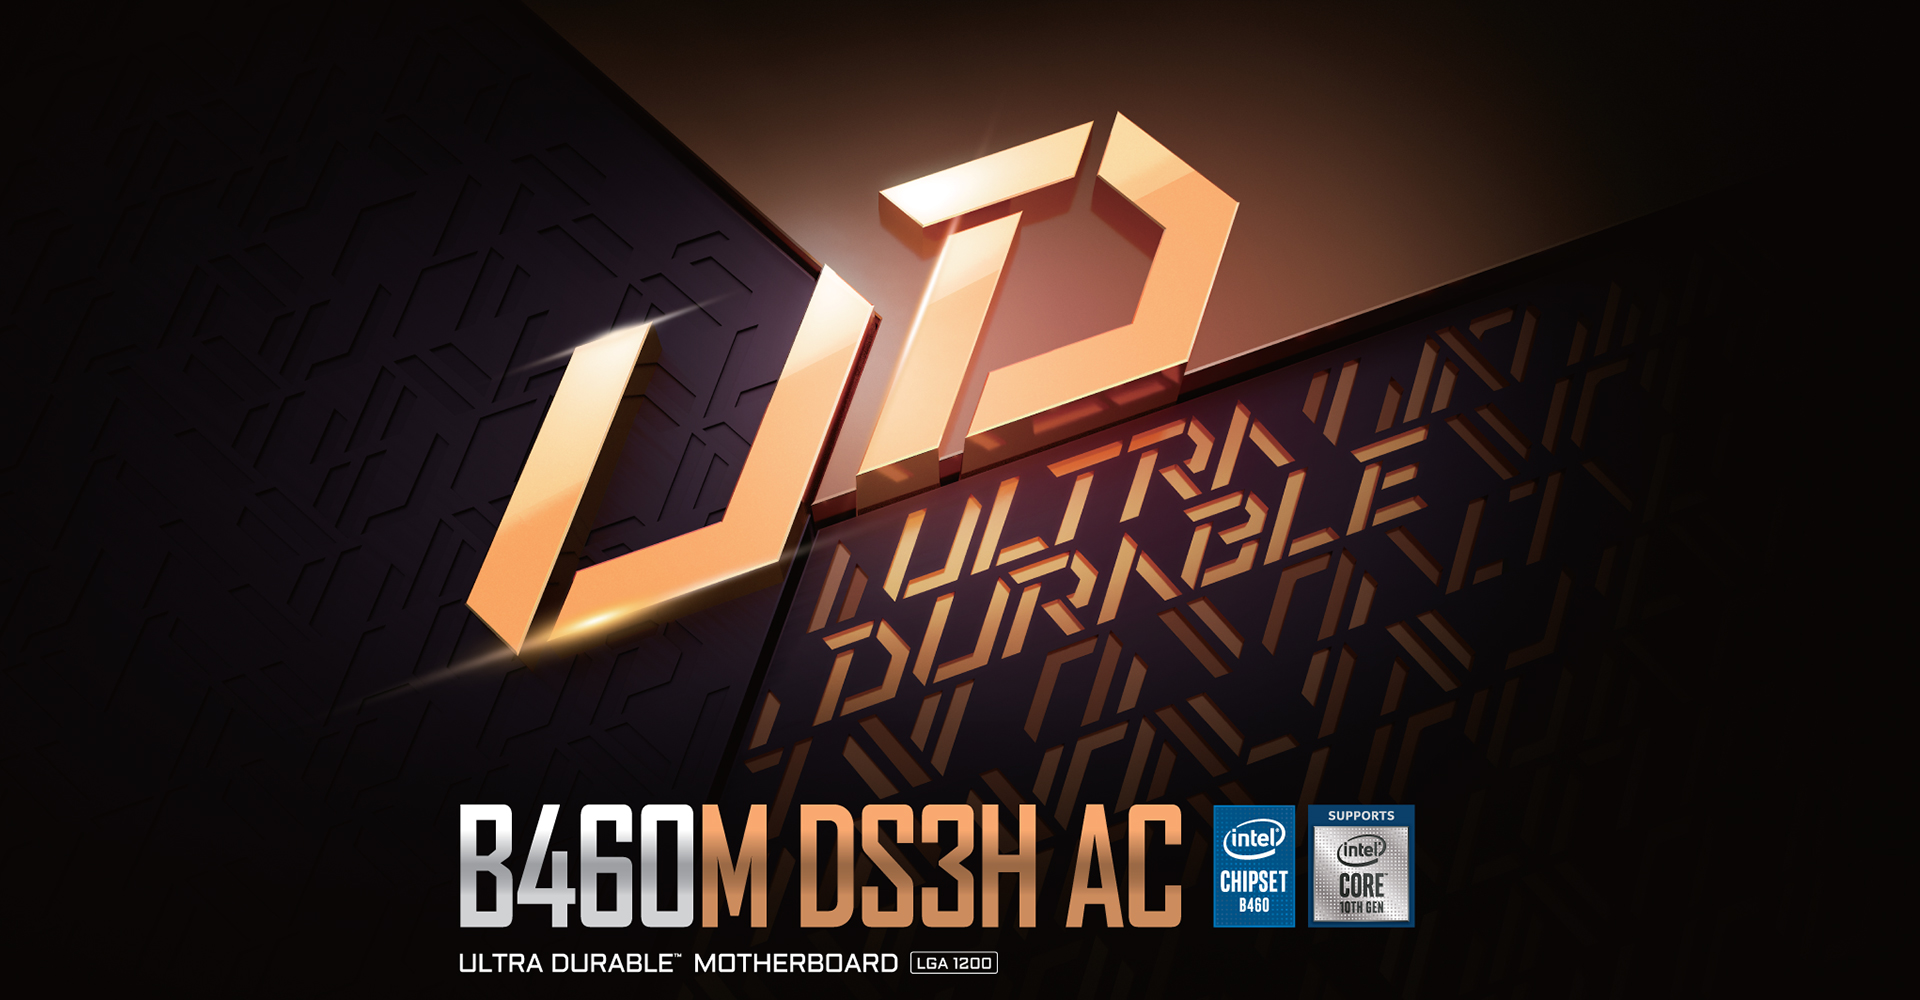 B460M DS3H AC (rev. 1.x) Key Features | Motherboard - GIGABYTE Global